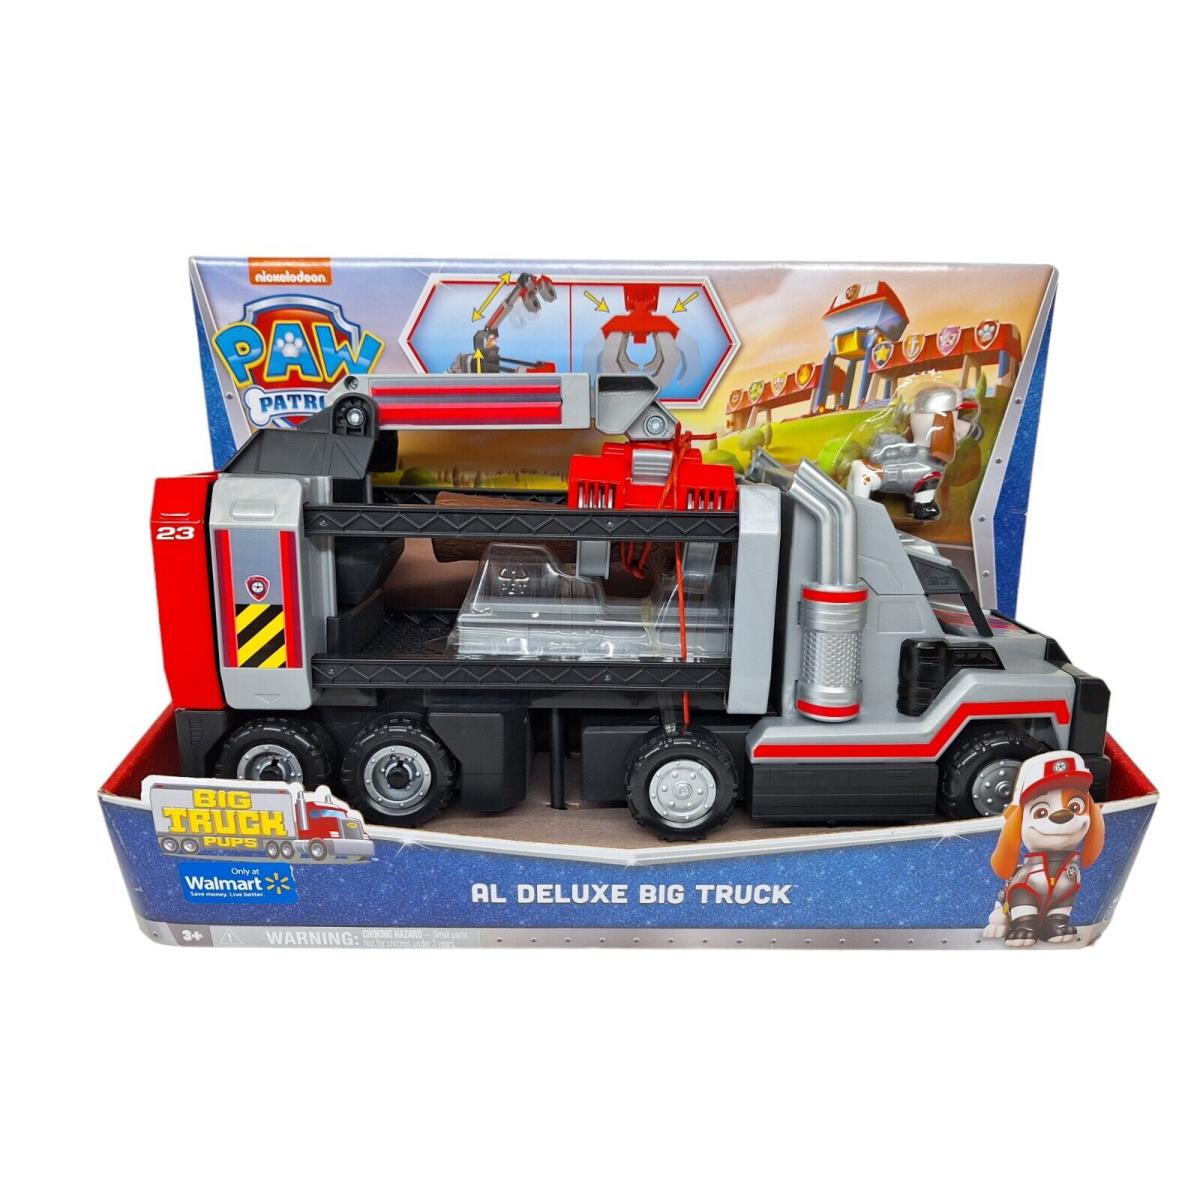 Paw Patrol Al s Deluxe Big Truck Toy with Moveable Claw Arm and Accessories